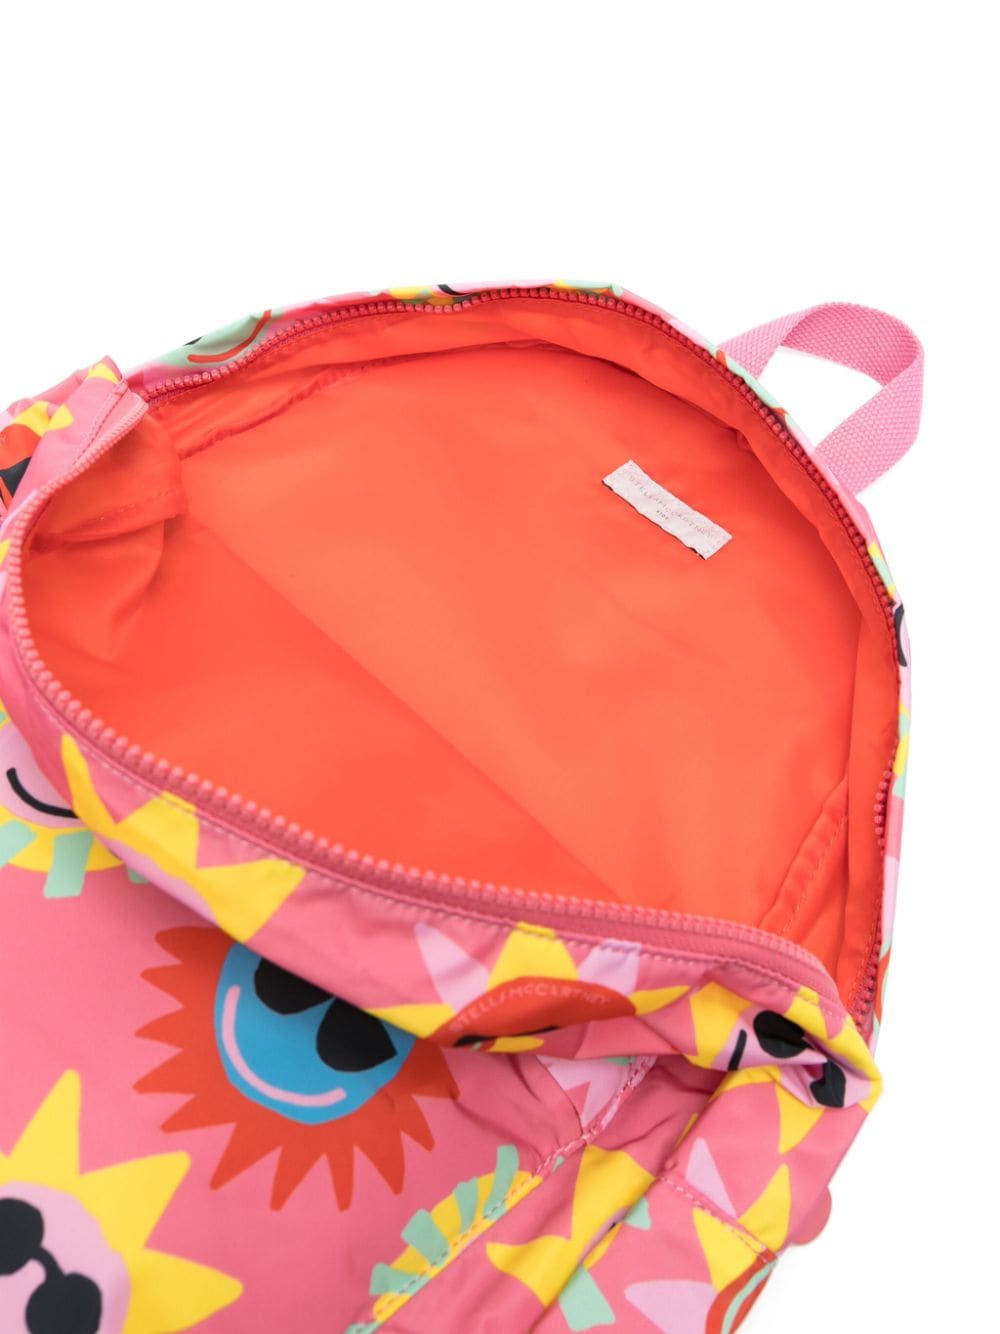 Bubblegum backpack for girls with print